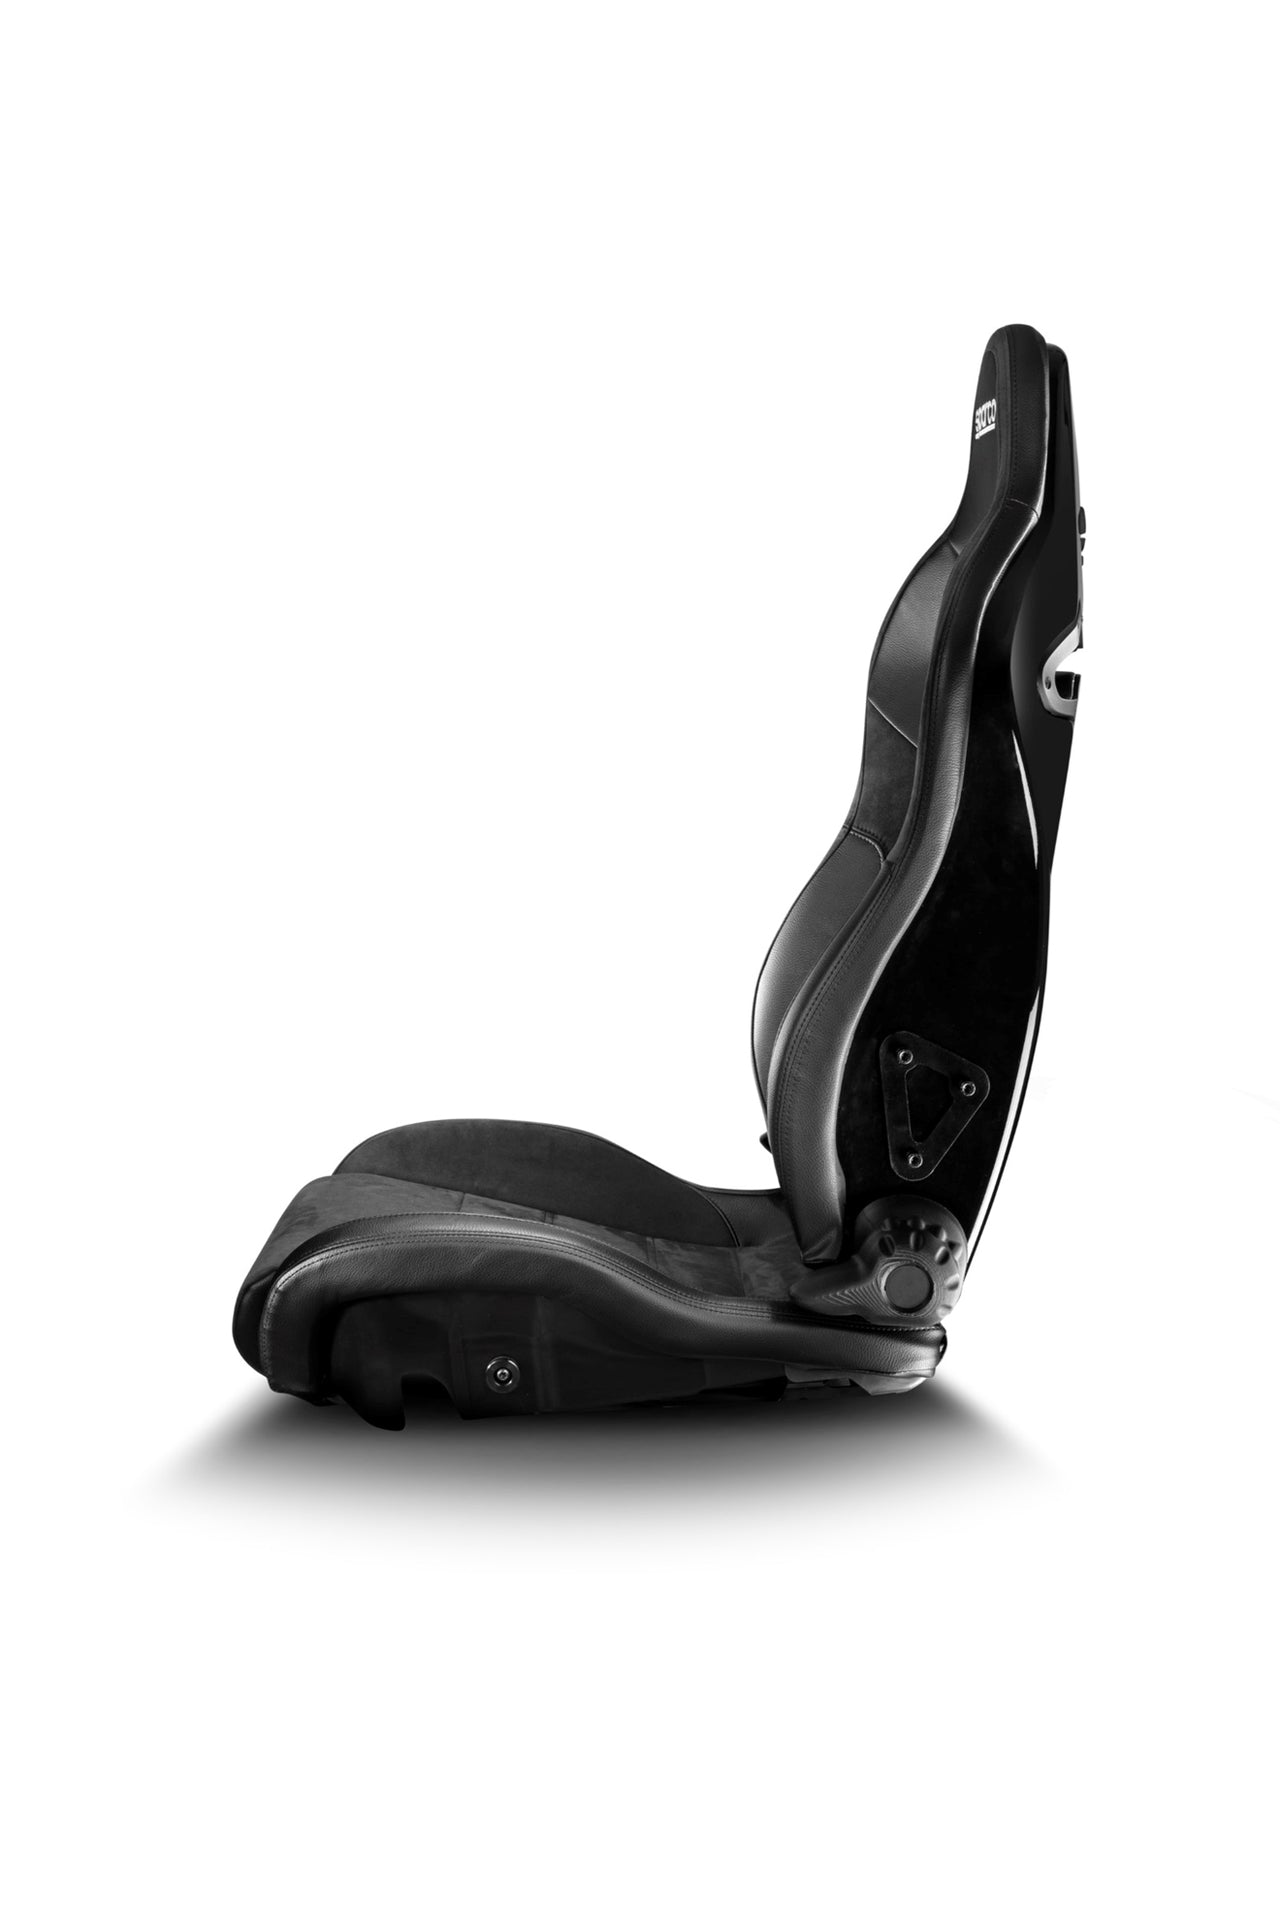 Sparco SPR Seat side Image pic